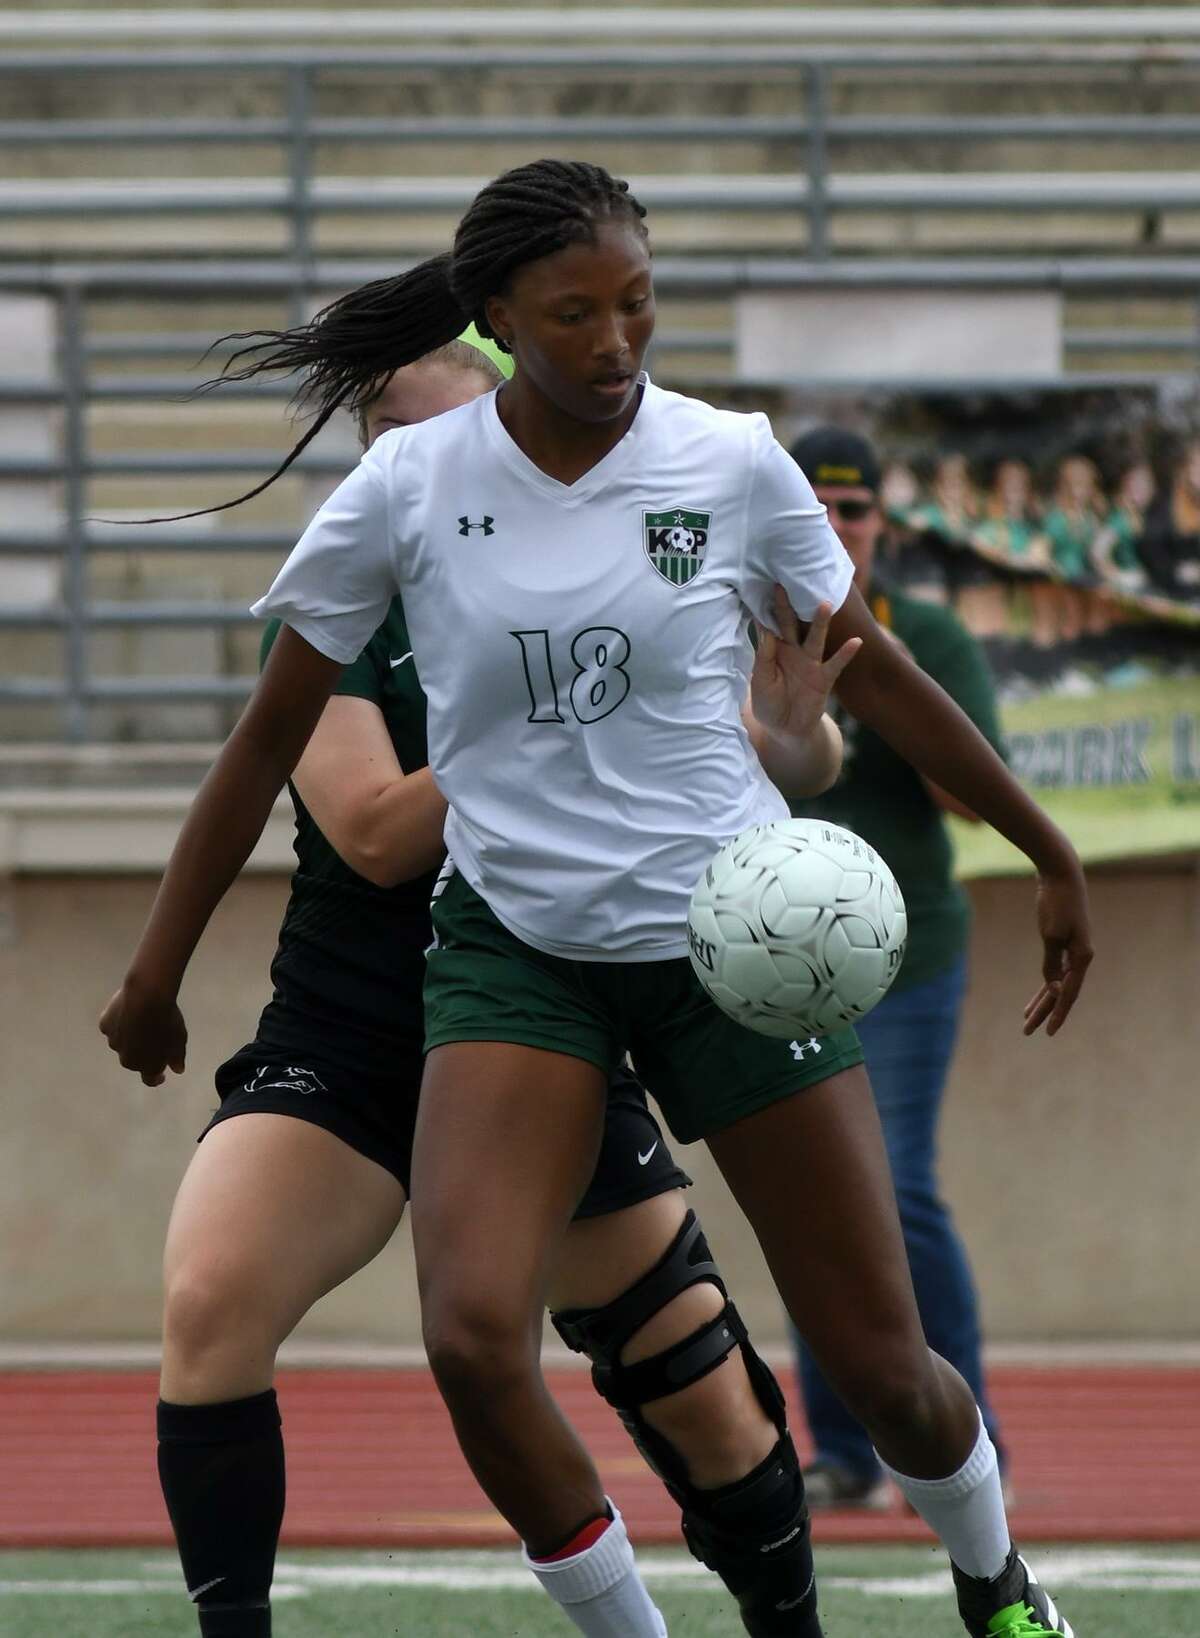 Kingwood Park junior midfielder Allie Byrd (18) makes a play against Cedar Park junior defender Ainsley Forbes during the first half of their UIL Region III-5A Girls Soccer semi-final matchup at Turner Stadium on April 13, 2018. (Photo by Jerry Baker/Freelance)